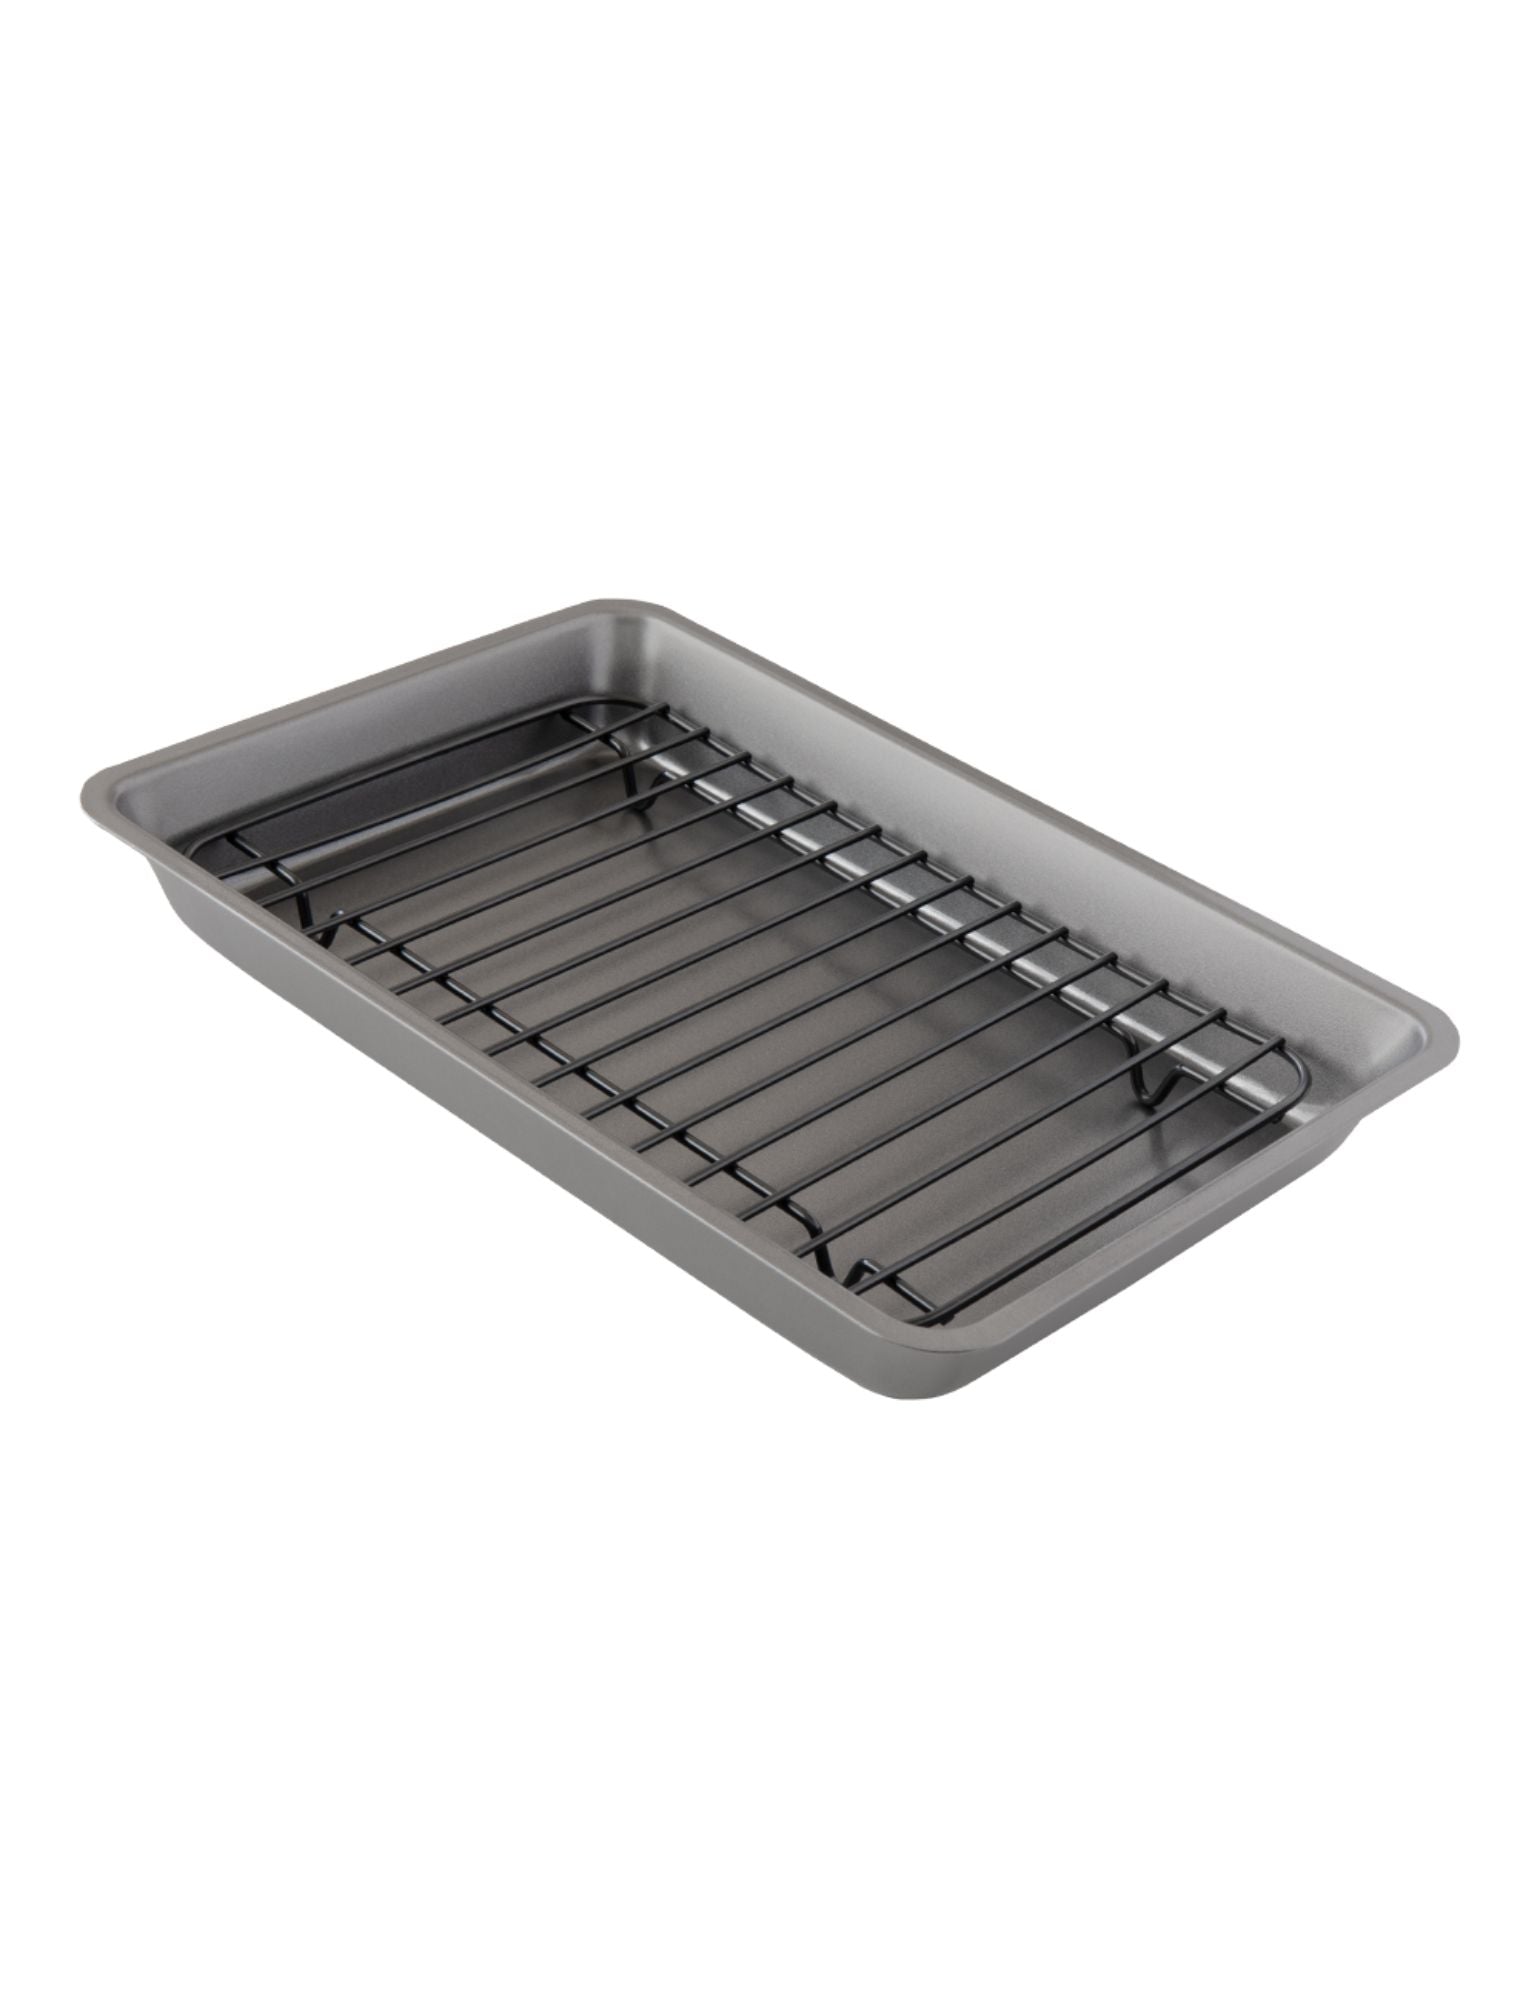 CHEFMADE Roasting Pan with Rack, 11-Inch Non-Stick Square Shallow